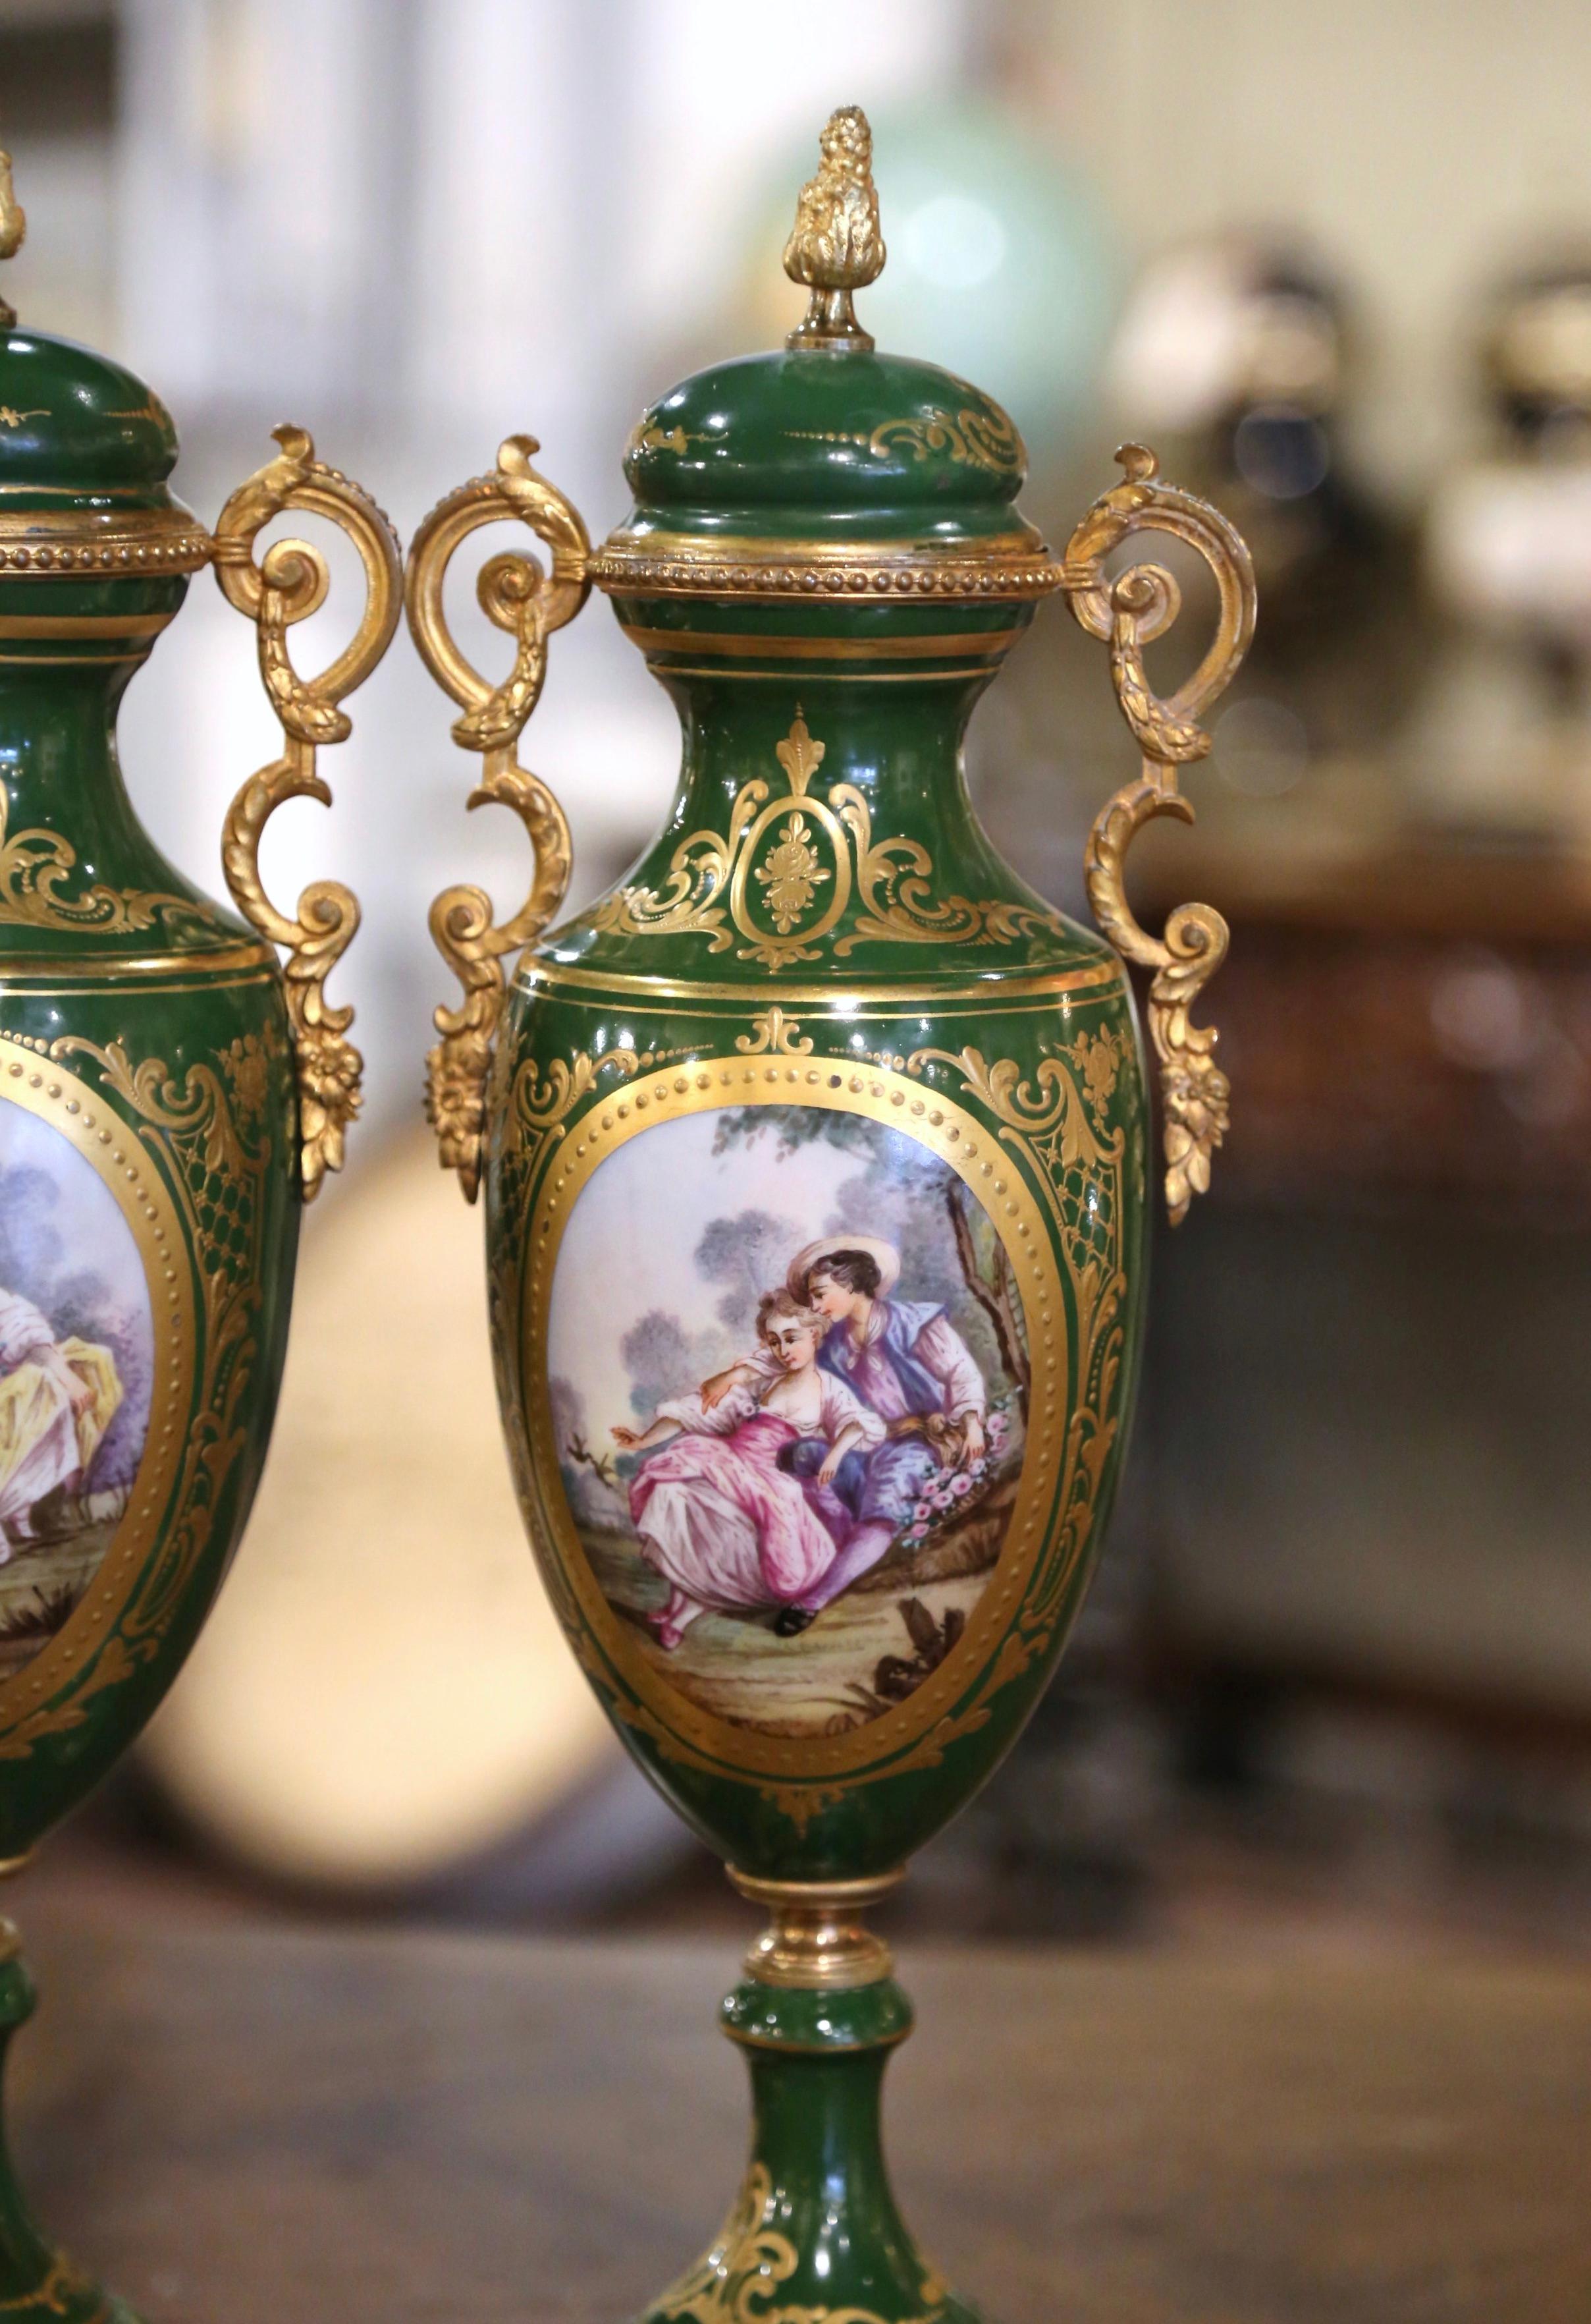 Pair of 19th Century French Sevres Gilt Metal and Painted Porcelain Covered Urns For Sale 1